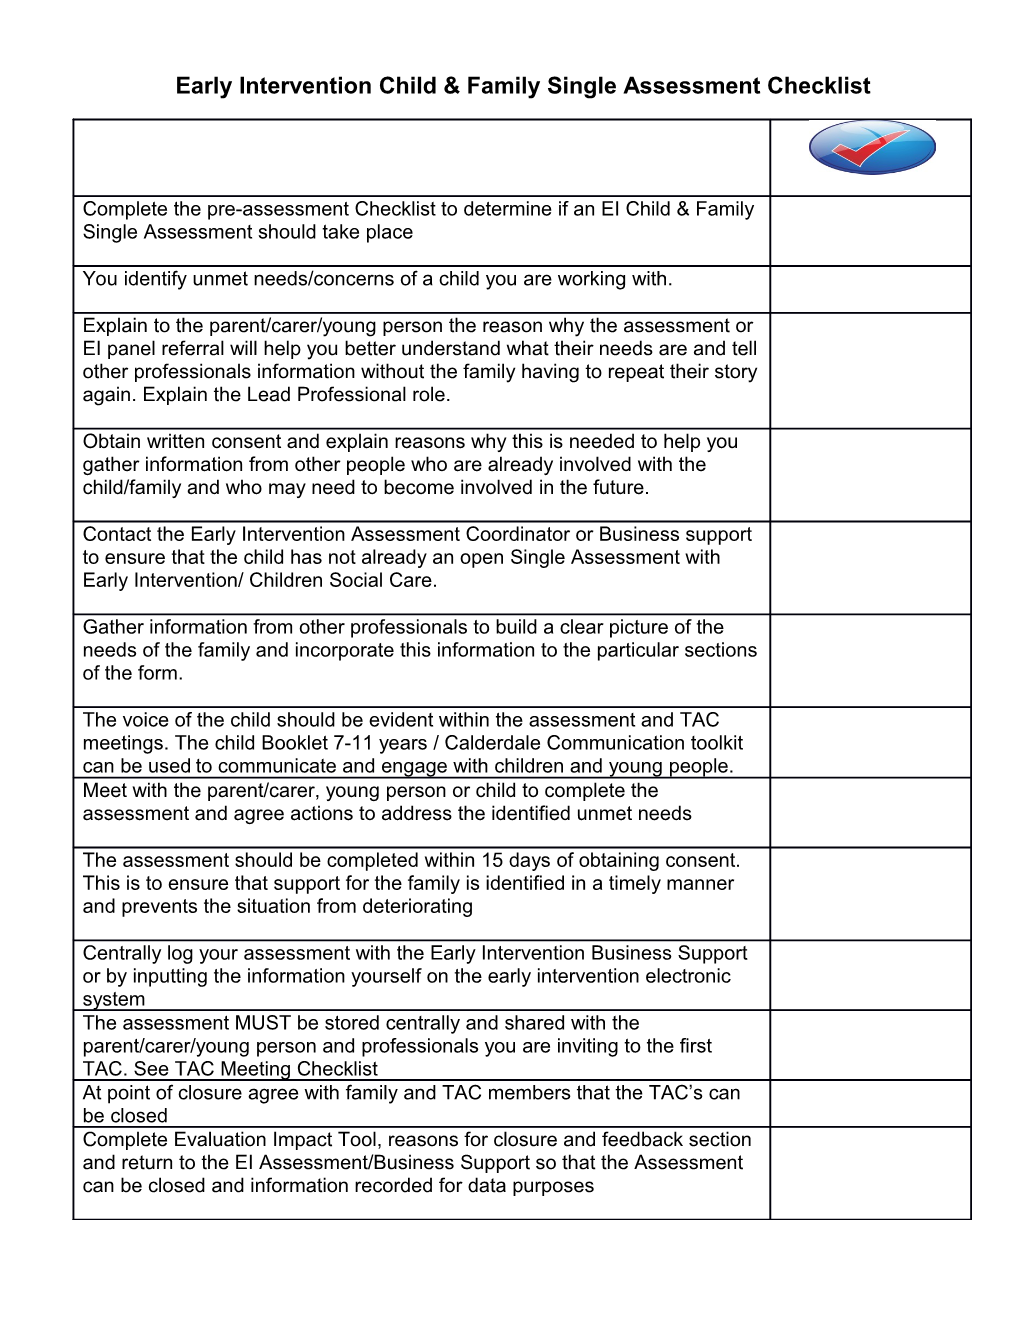 Early Intervention Child and Family Single Assessment Checklist